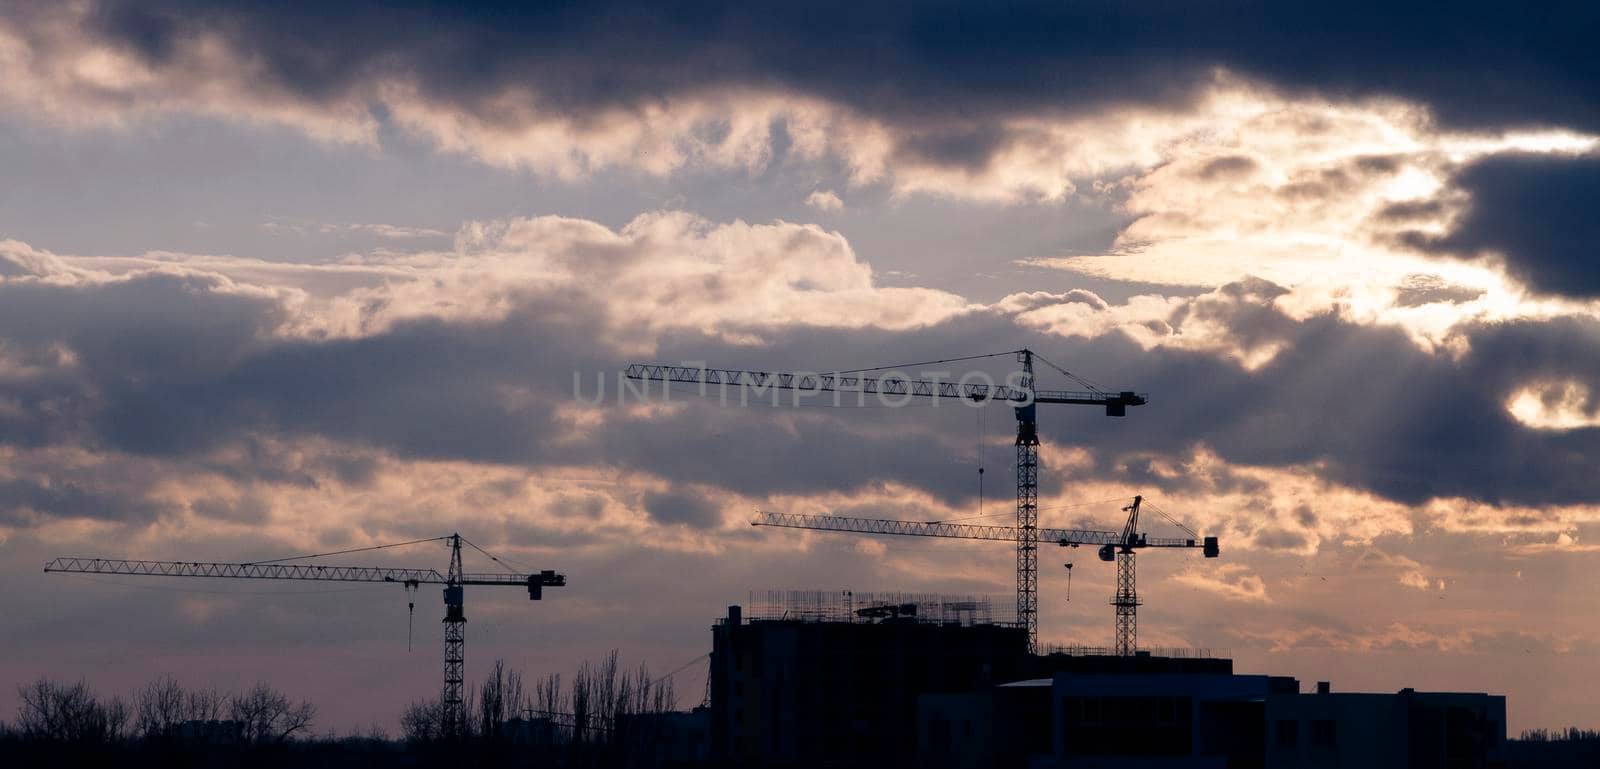 Construction cranes at sunset against the background of gray clouds with sunshades. Silhouettes of building cranes at sunset.